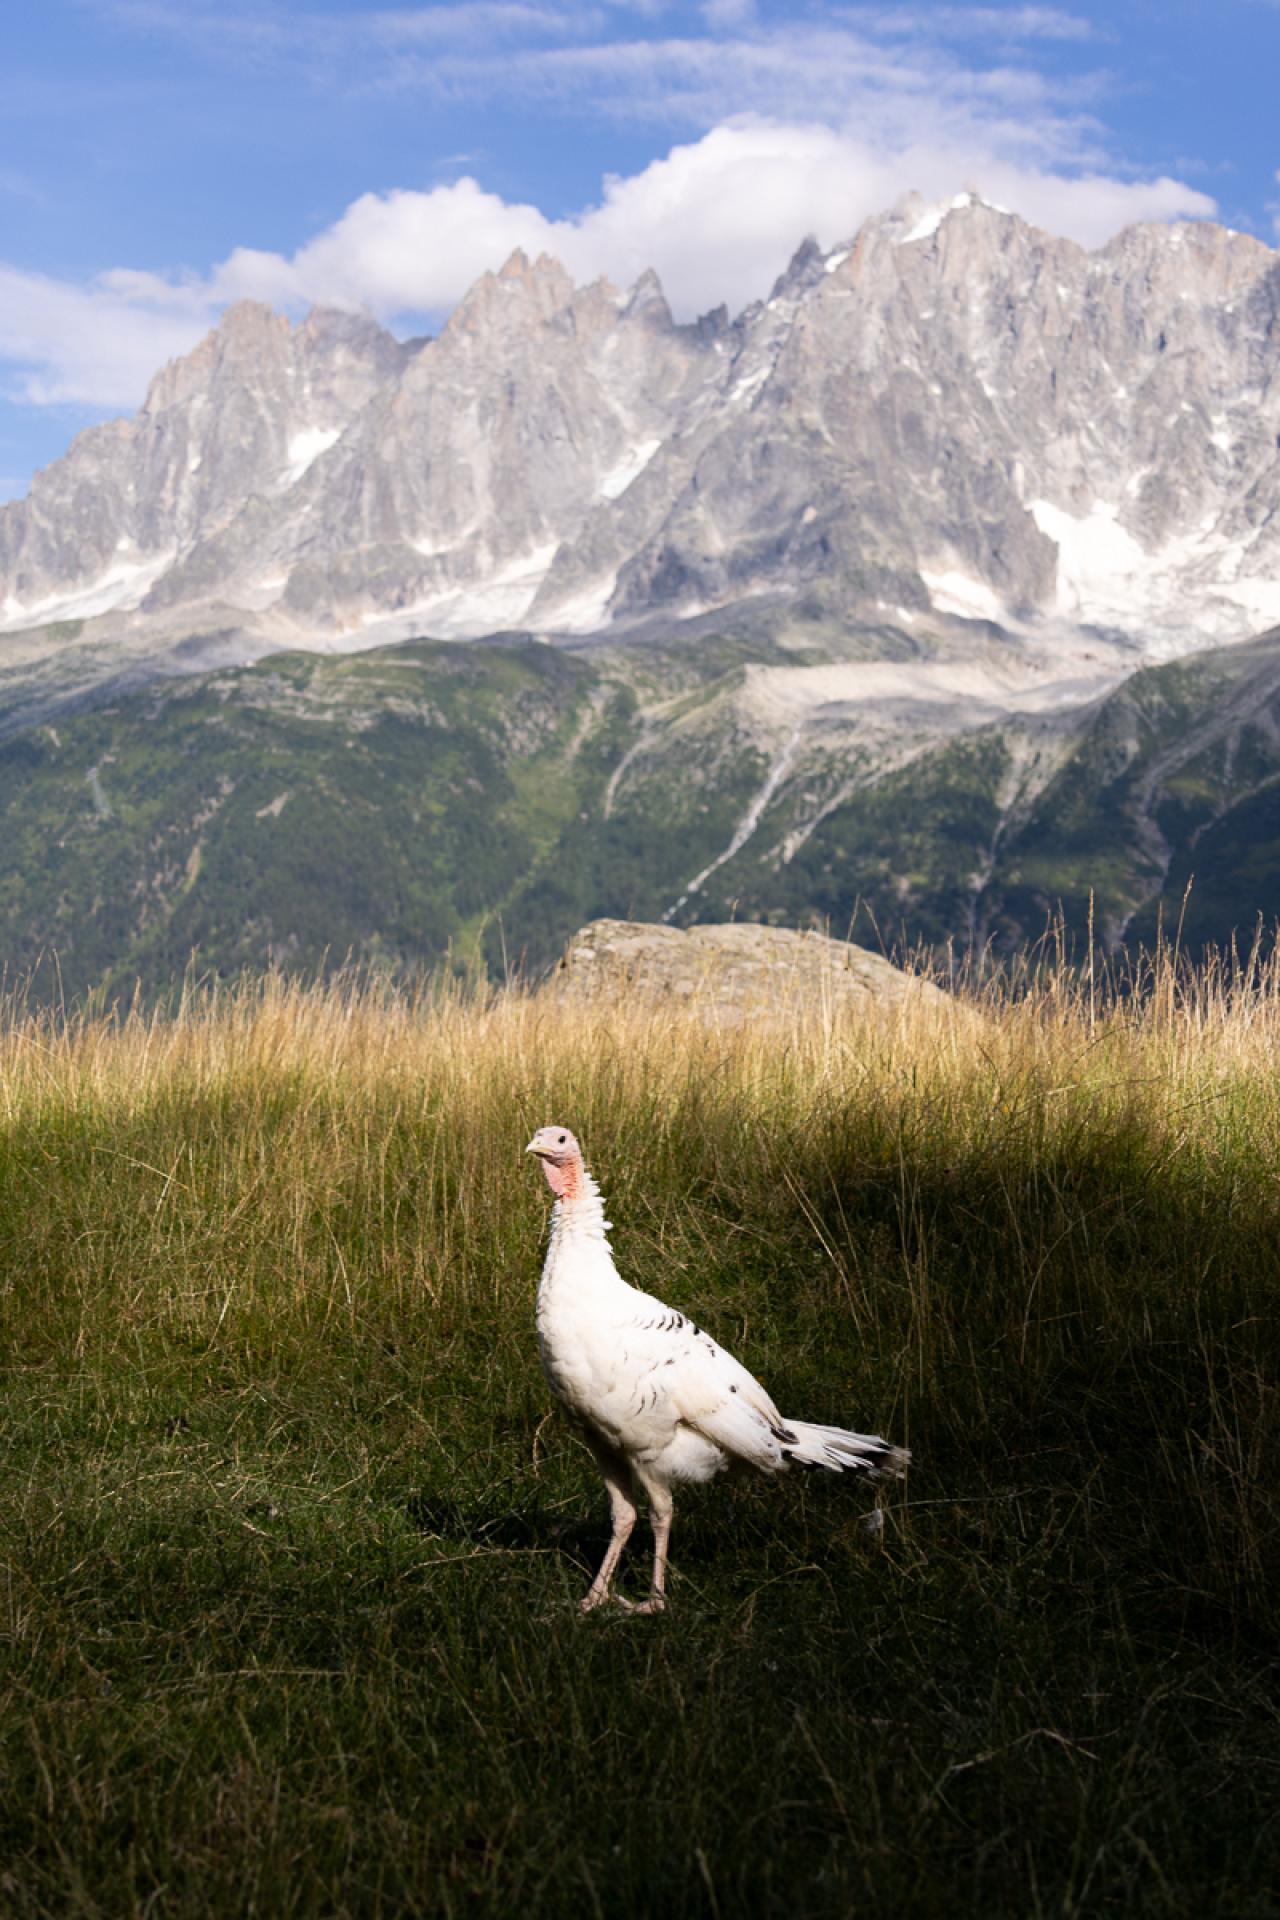 European Photography Awards Winner - A Bird with the View